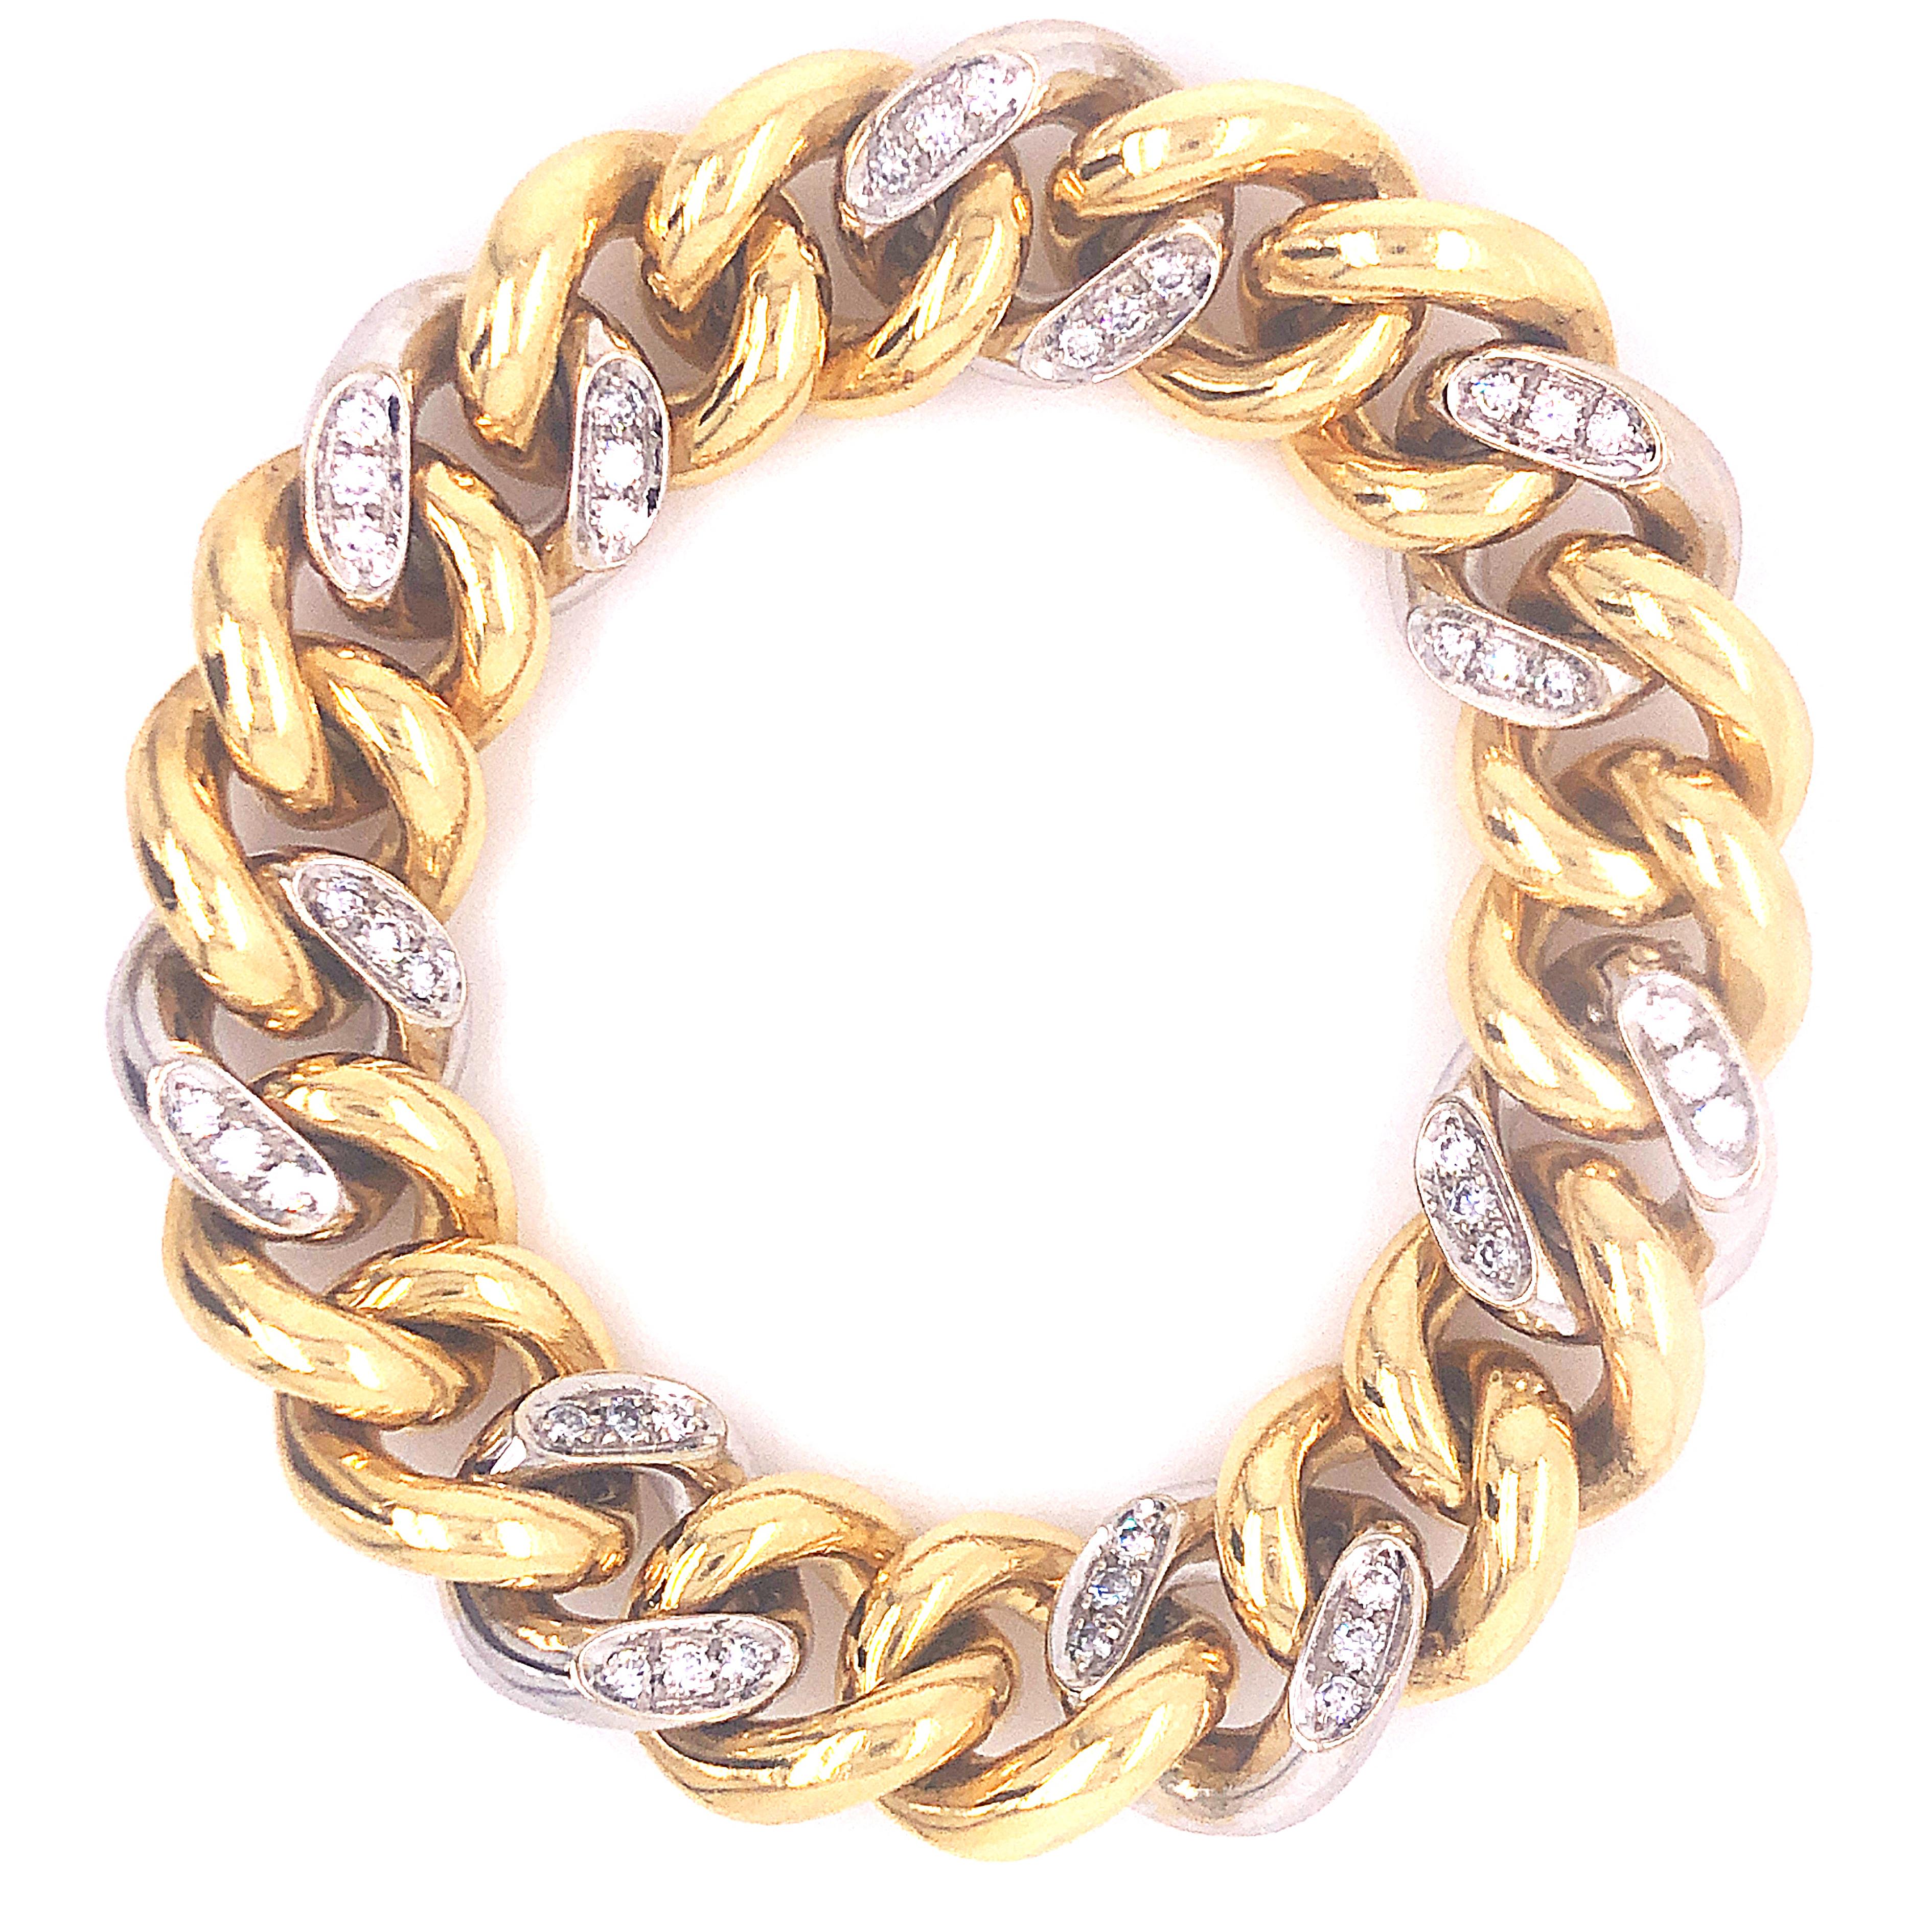 One-of-a-kind, Extra-ordinary, Original 80’s Chic and absolutely Timeless Pomellato Famous B21 Gourmette Bracelet, a beautiful example of Italian Craftsman of the period: 1.26Kt Top Quality White Diamond, in a 3.77OzT(117.1g) 18k Solid Yellow and